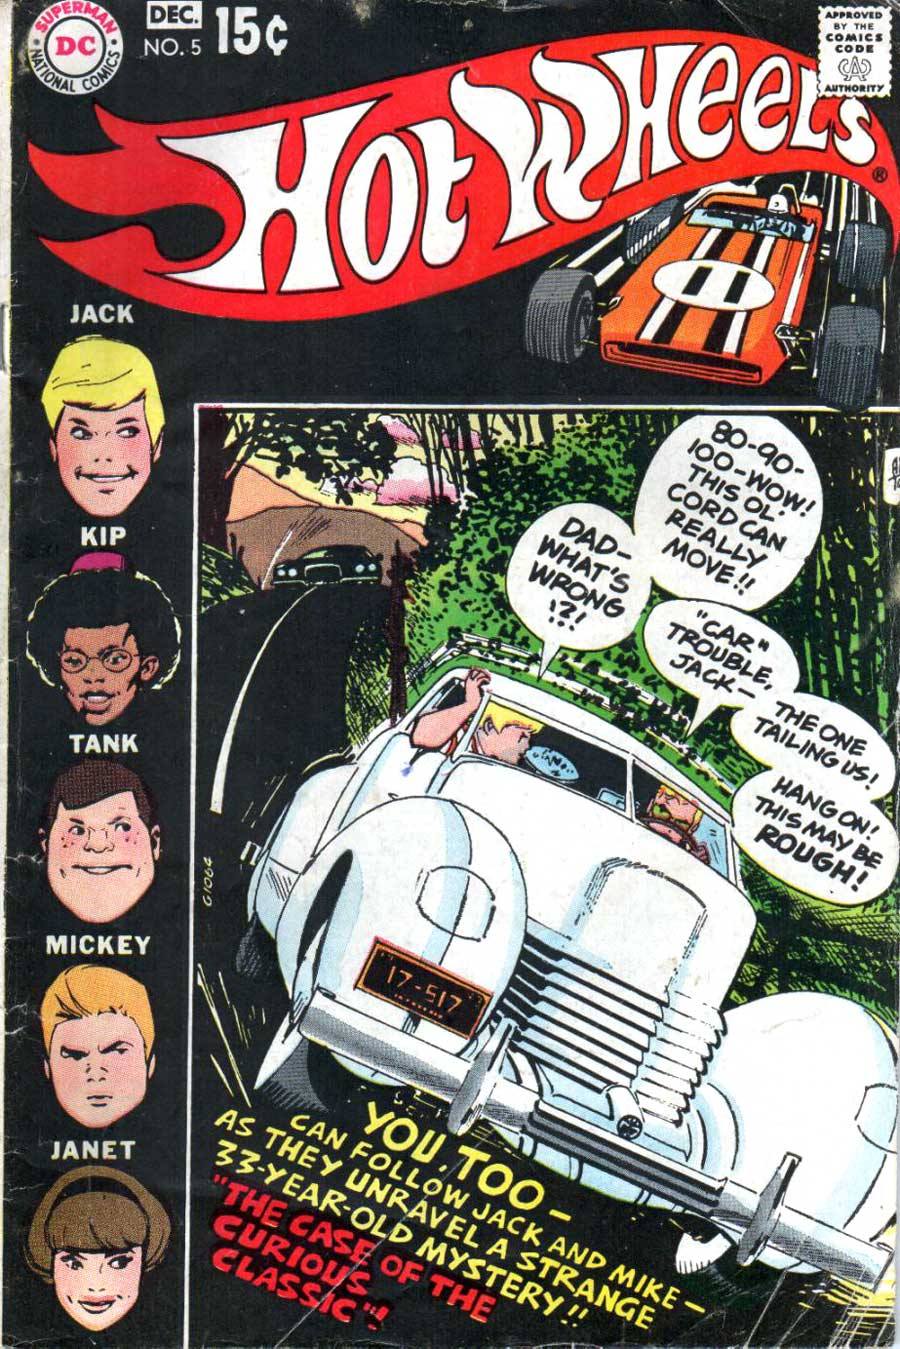 Hot Wheels v1 #5 dc 1970s bronze age comic book cover art by Alex Toth